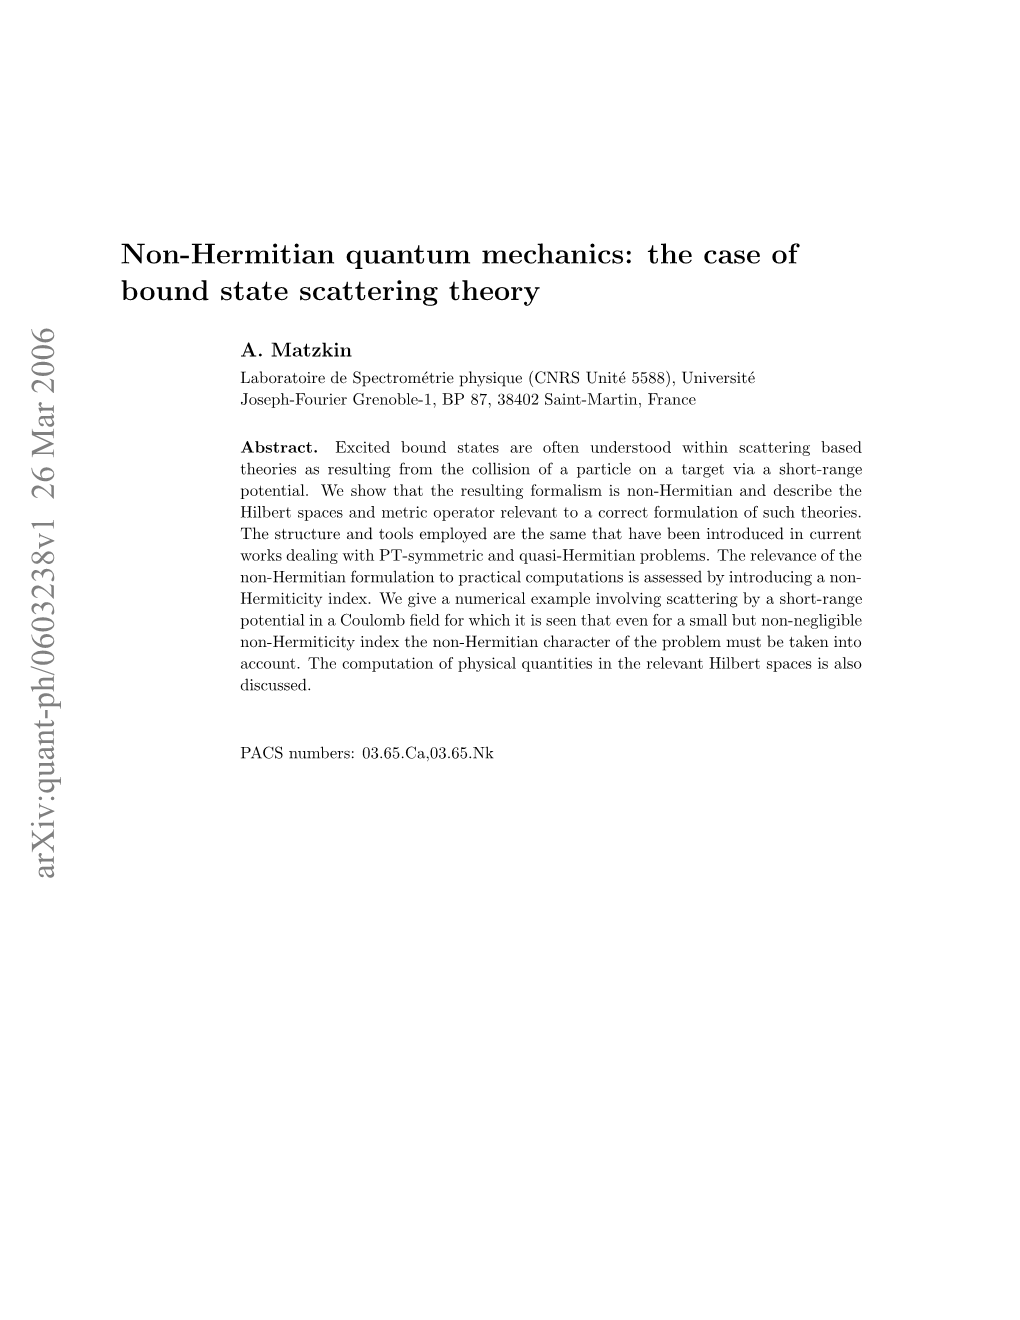 Non-Hermitian Quantum Mechanics: the Case of Bound State Scattering Theory 2